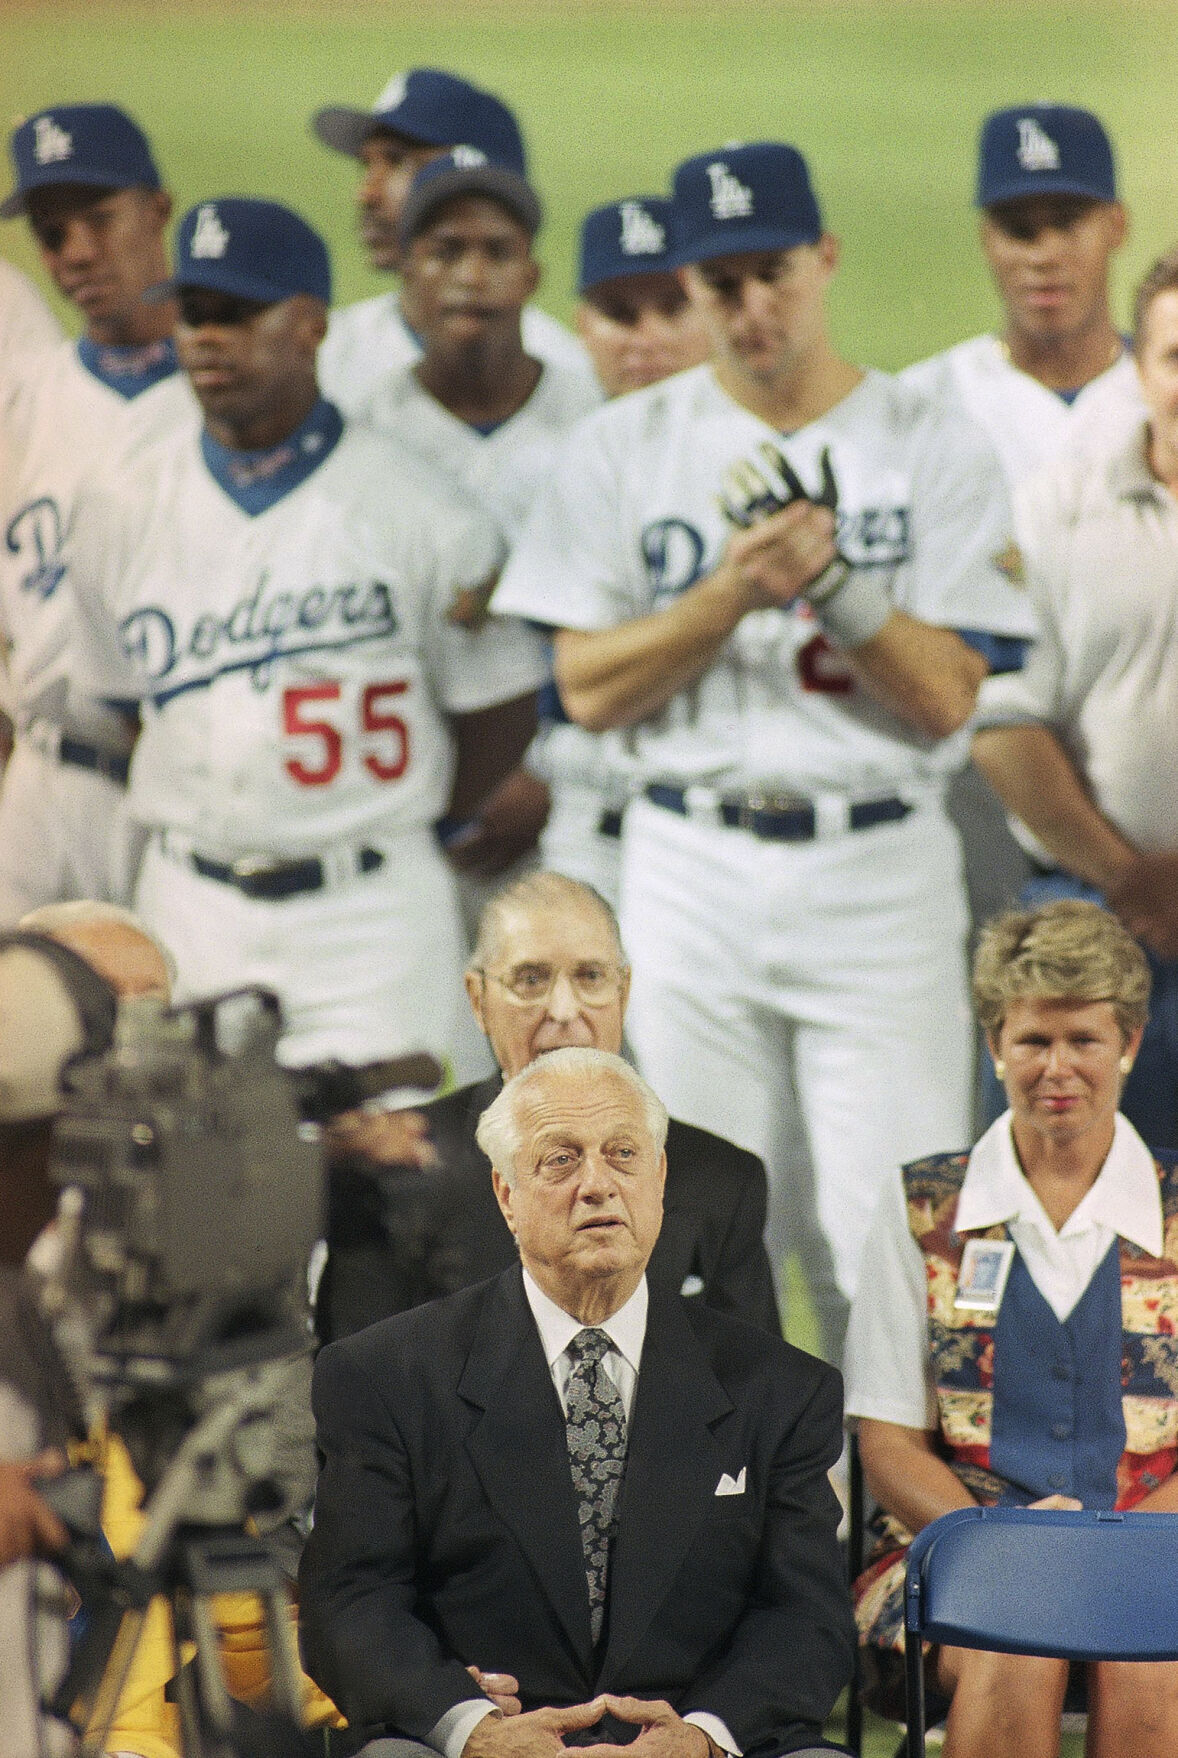 PHOTOS: Legendary Dodgers manager Tommy Lasorda, 1927-2021, Sports